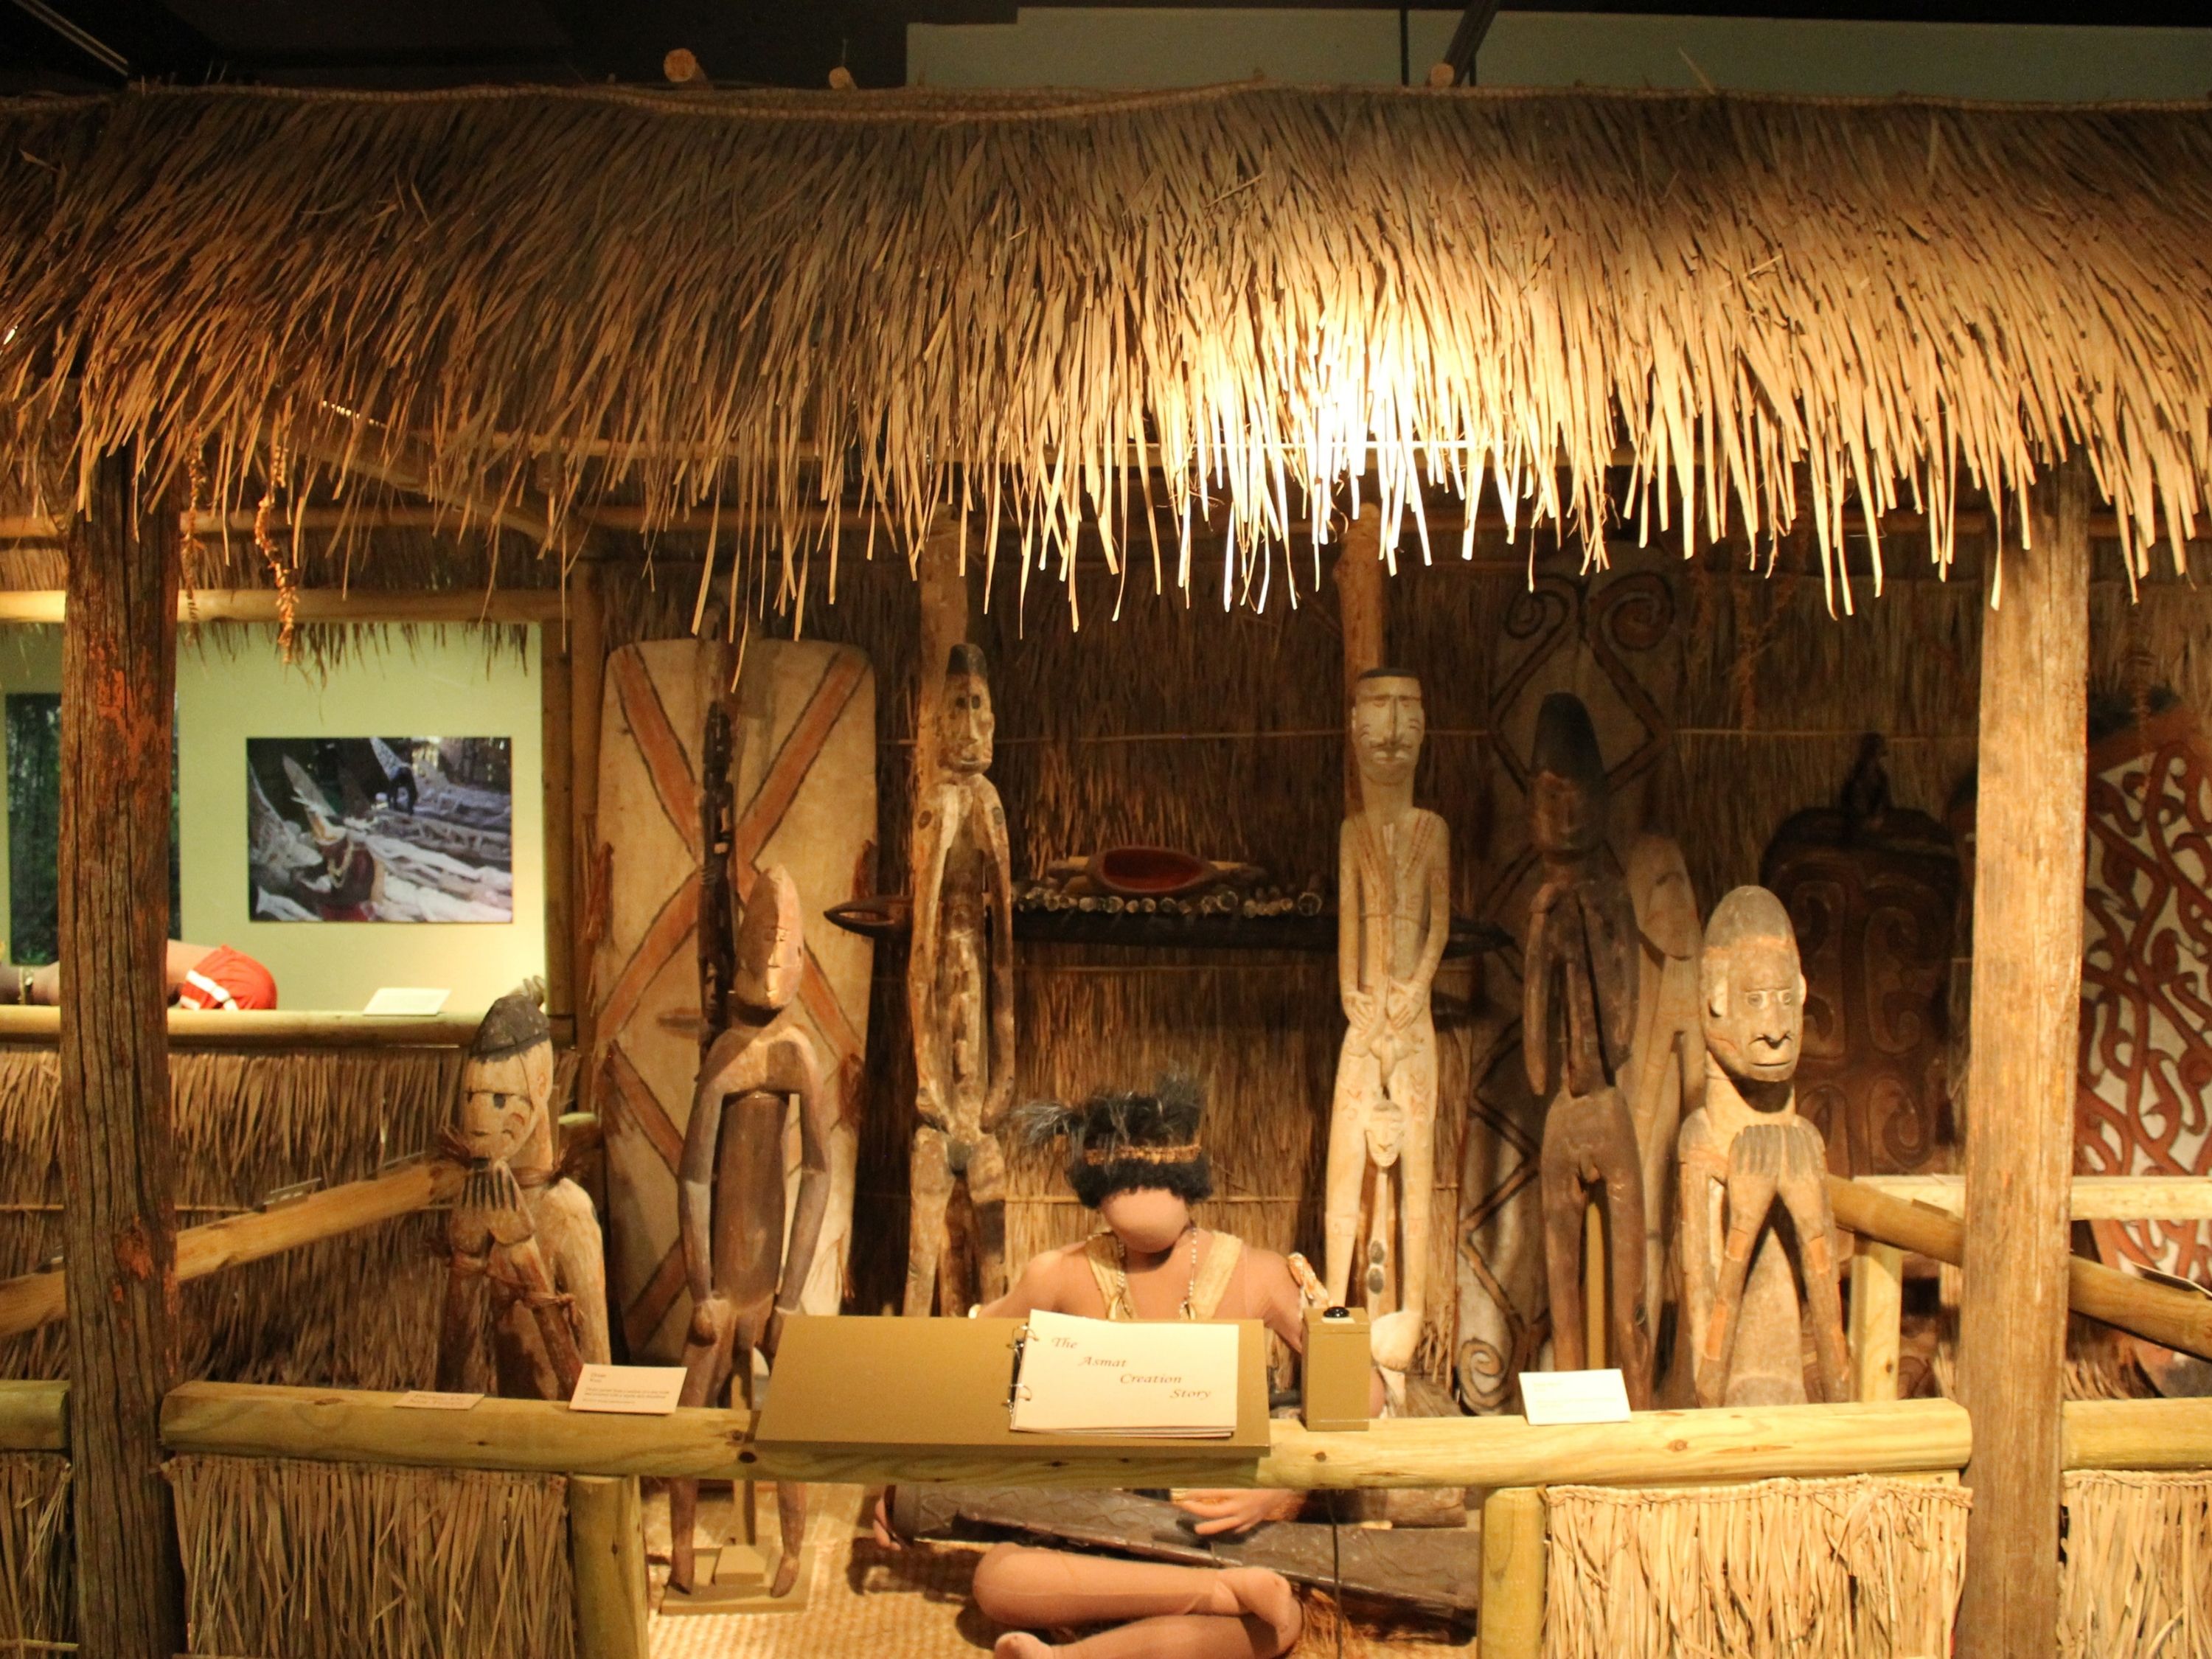 The display depicts a mannequin in an Asmat costume playing a hand drum in a thatched hut. Around him are wooden statues of men. In front is a flipbook about the Asmat creation story.